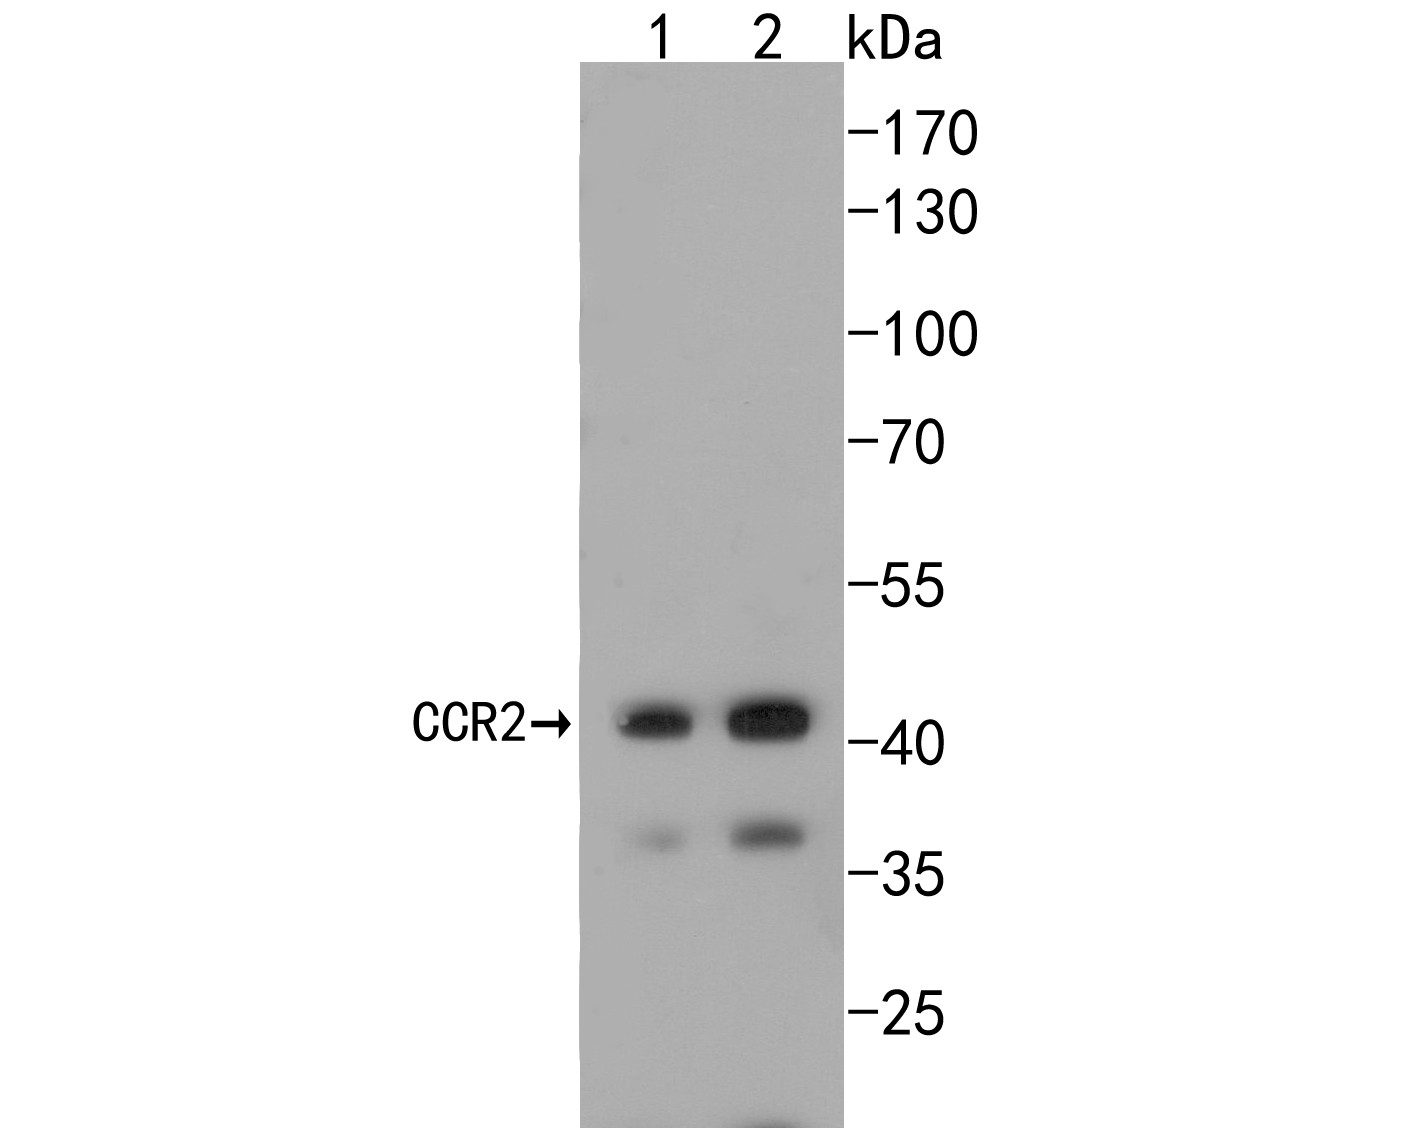 Western blot analysis of CCR2 on different lysates. Proteins were transferred to a PVDF membrane and blocked with 5% BSA in PBS for 1 hour at room temperature. The primary antibody (ET1611-65, 1/500) was used in 5% BSA at room temperature for 2 hours. Goat Anti-Rabbit IgG - HRP Secondary Antibody (HA1001) at 1:5,000 dilution was used for 1 hour at room temperature.<br />
Positive control: <br />
Lane 1: mouse spleen tissue lysate<br />
Lane 2: THP-1 cell lysate